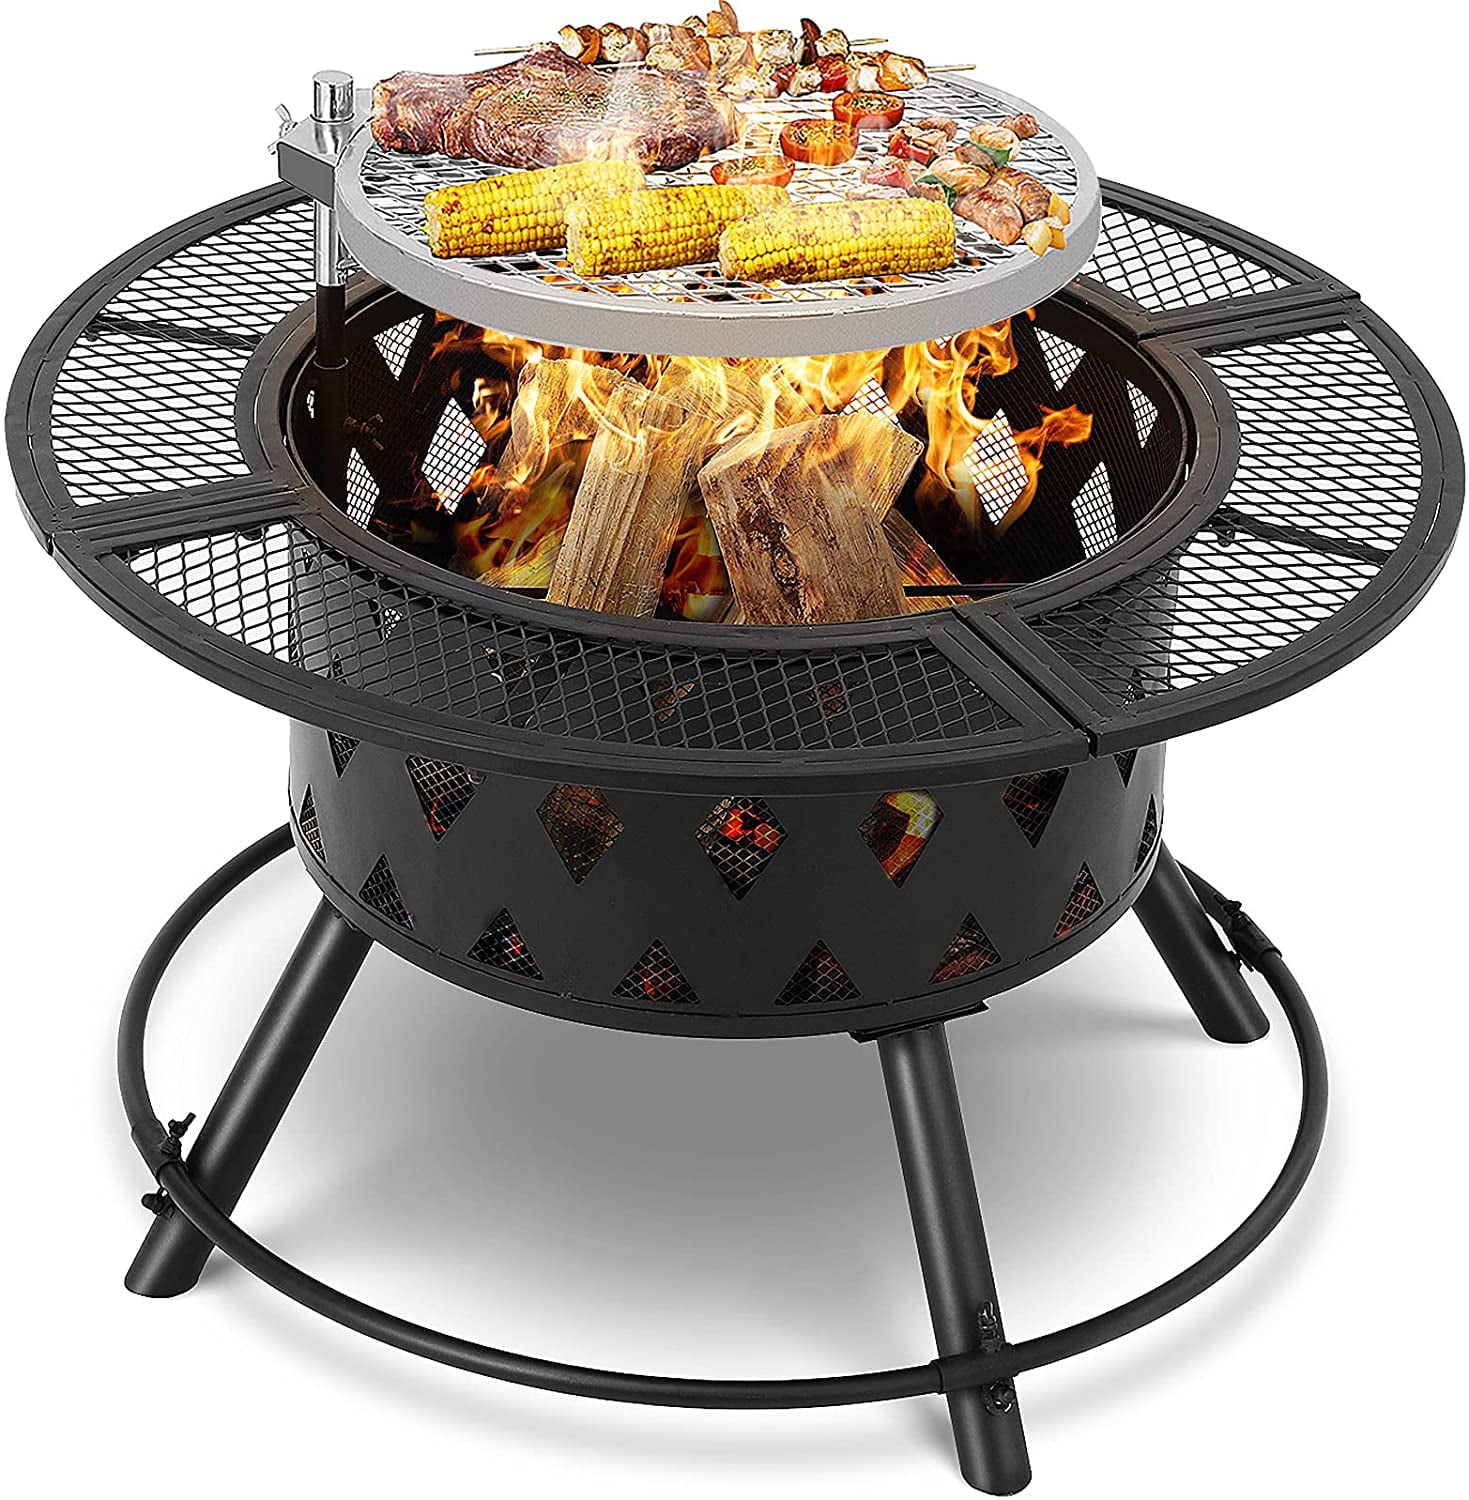 Outdoor Wood Burning Fire Pit, Round Fire Pit Cooking Grate